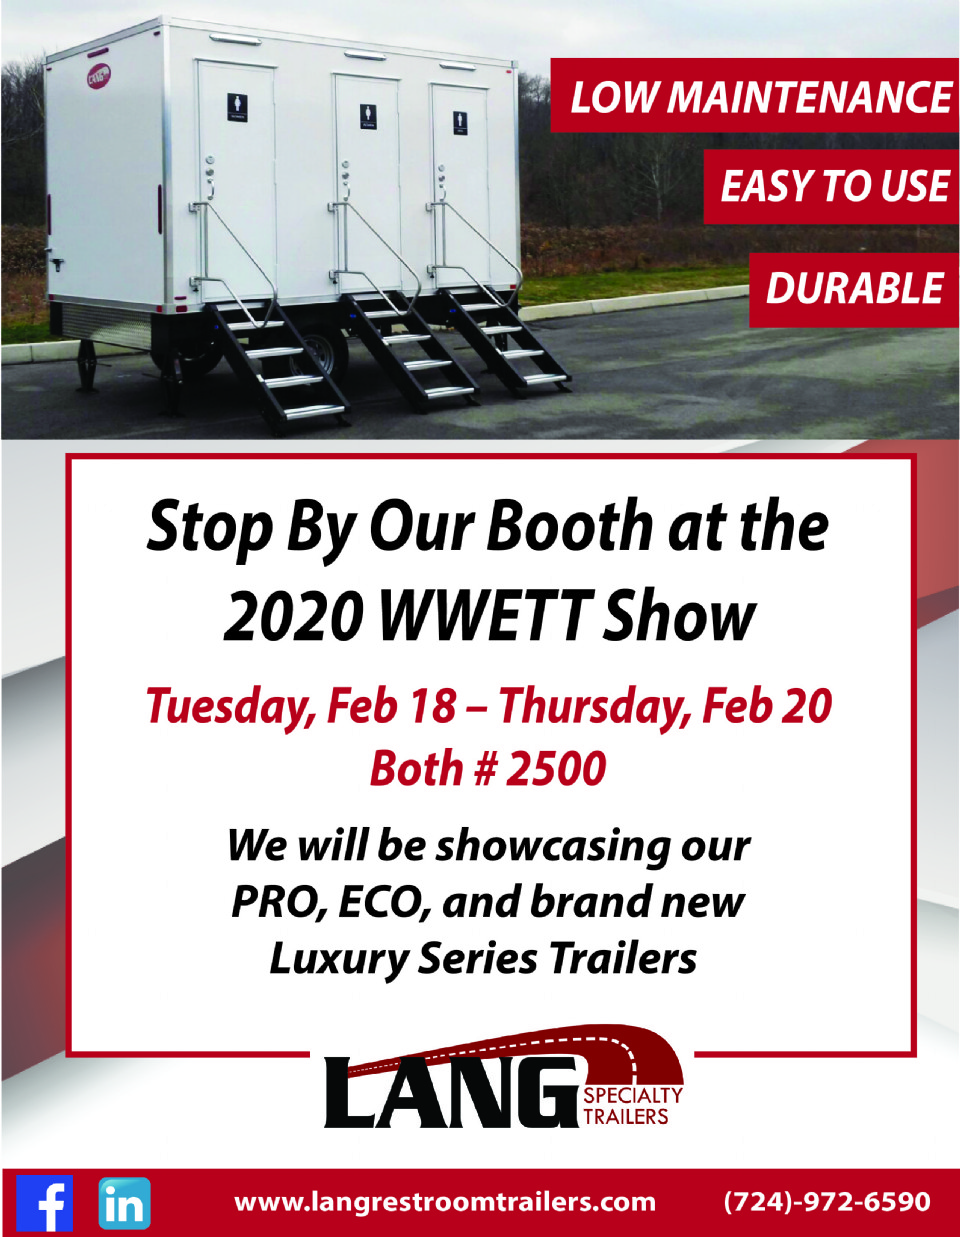 Visit Us at the 2020 WWETT Show!